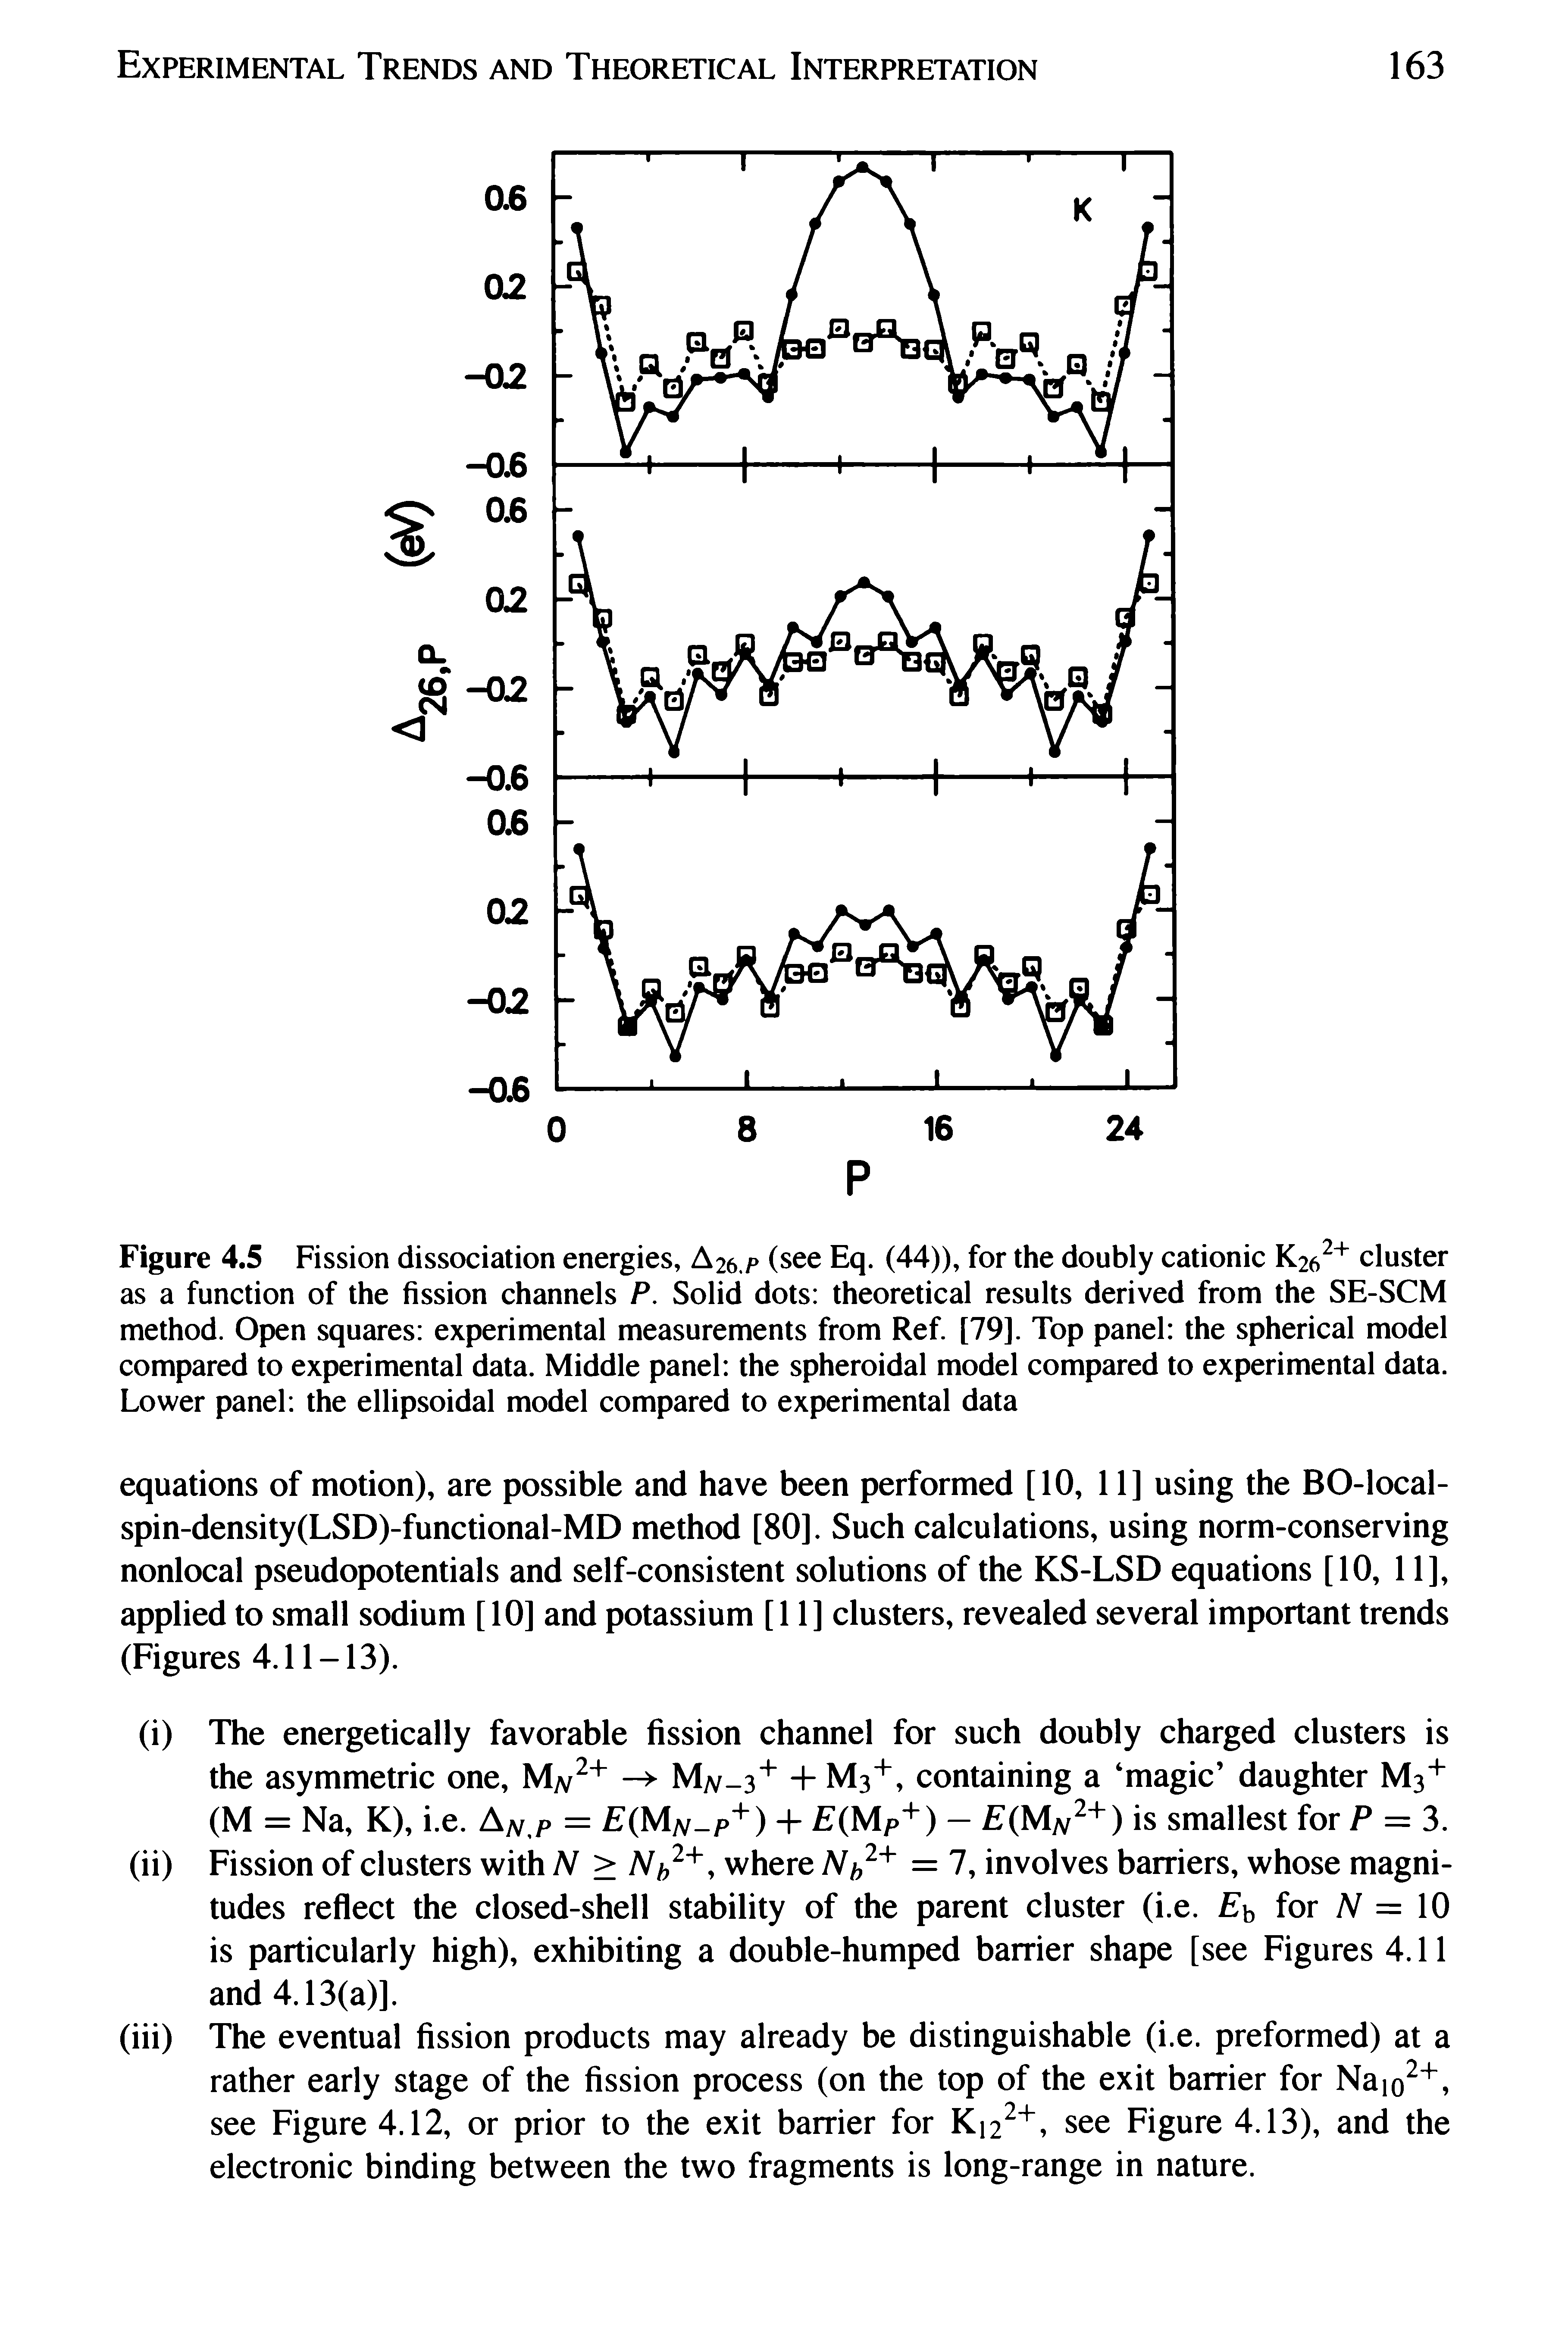 Figure 4.5 Fission dissociation energies, A26.P (see Eq. (44)), for the doubly cationic K26 cluster as a function of the fission channels P. Solid dots theoretical results derived from the SE-SCM method. Open squares experimental measurements from Ref. [79]. Top panel the spherical model compared to experimental data. Middle panel the spheroidal model compared to experimental data. Lower panel the ellipsoidal model compared to experimental data...